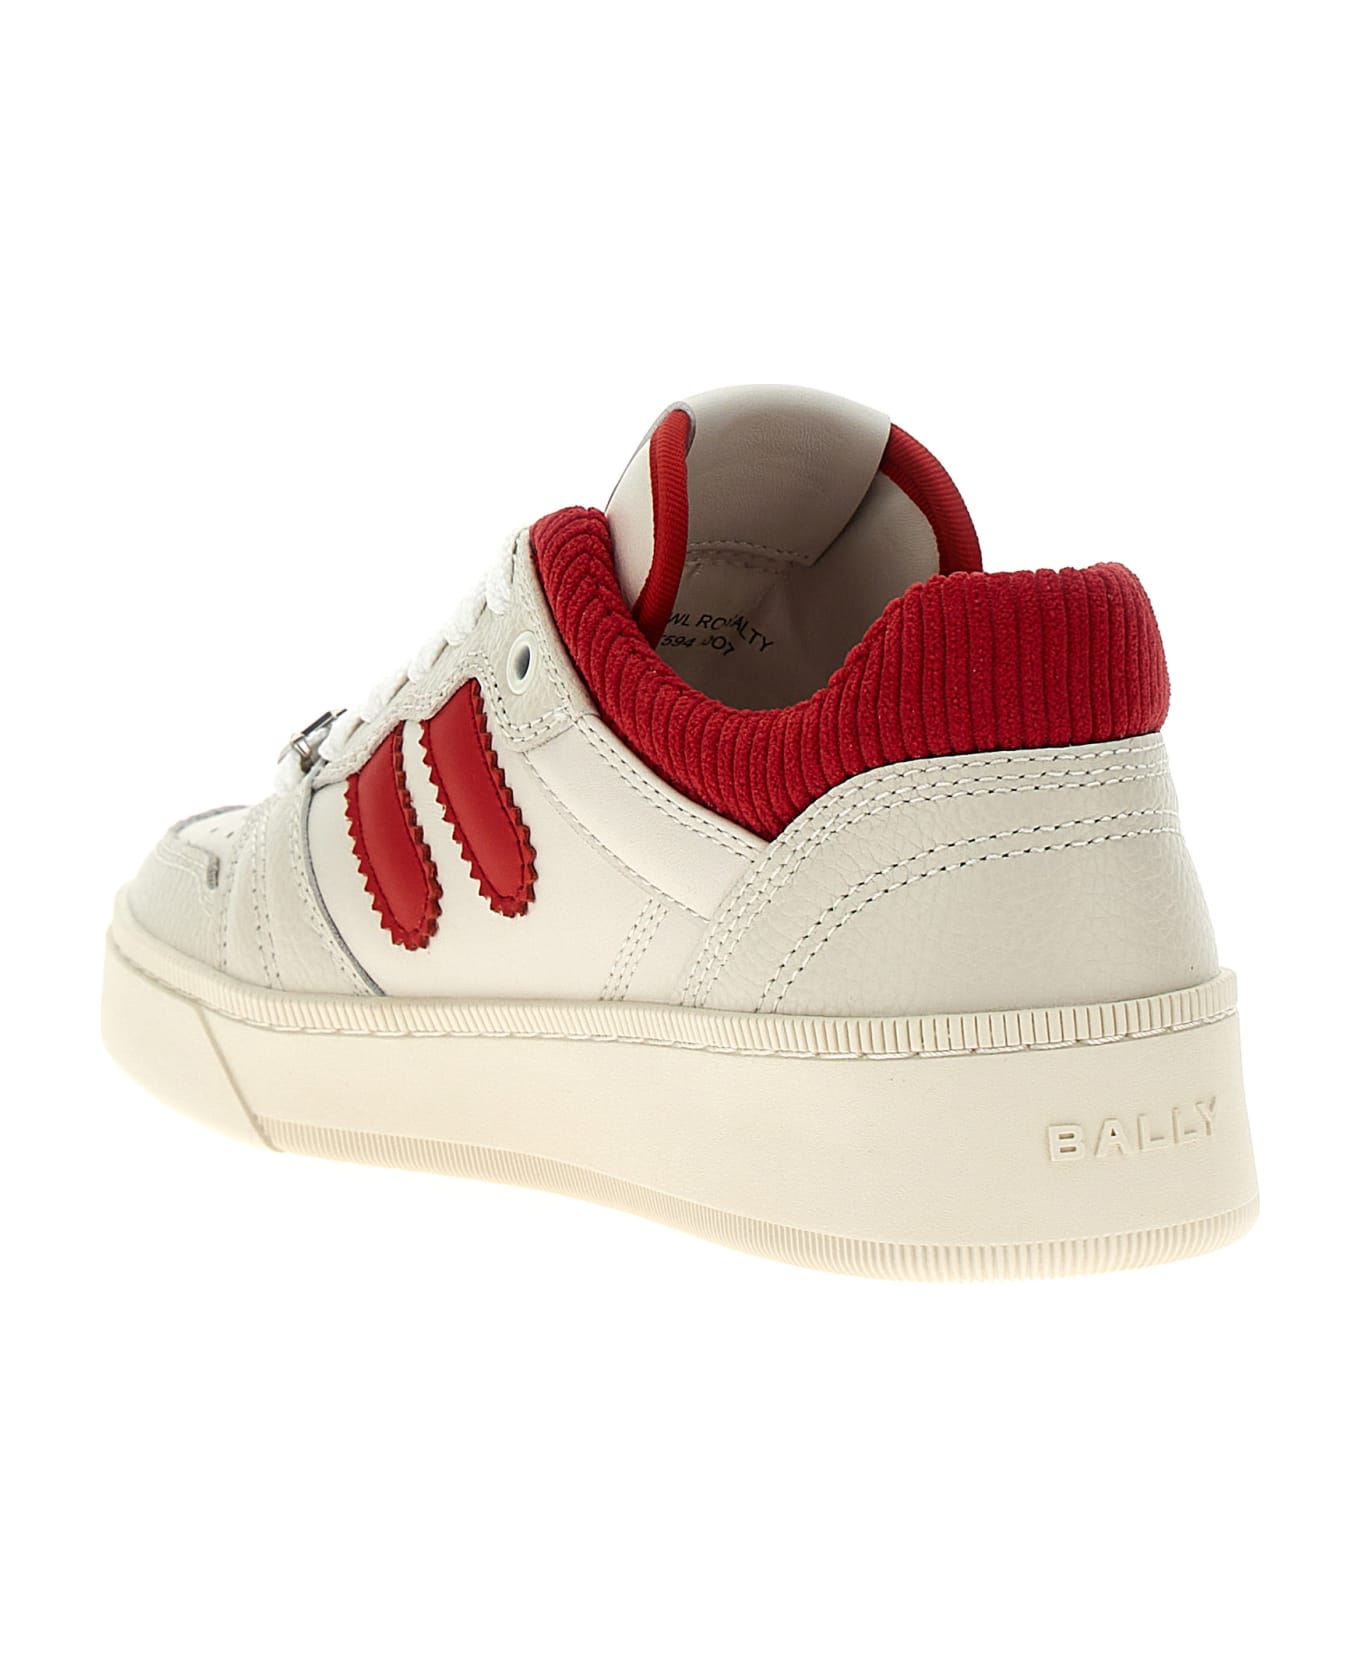 Bally 'royalty' Sneakers - WHITE/RED スニーカー